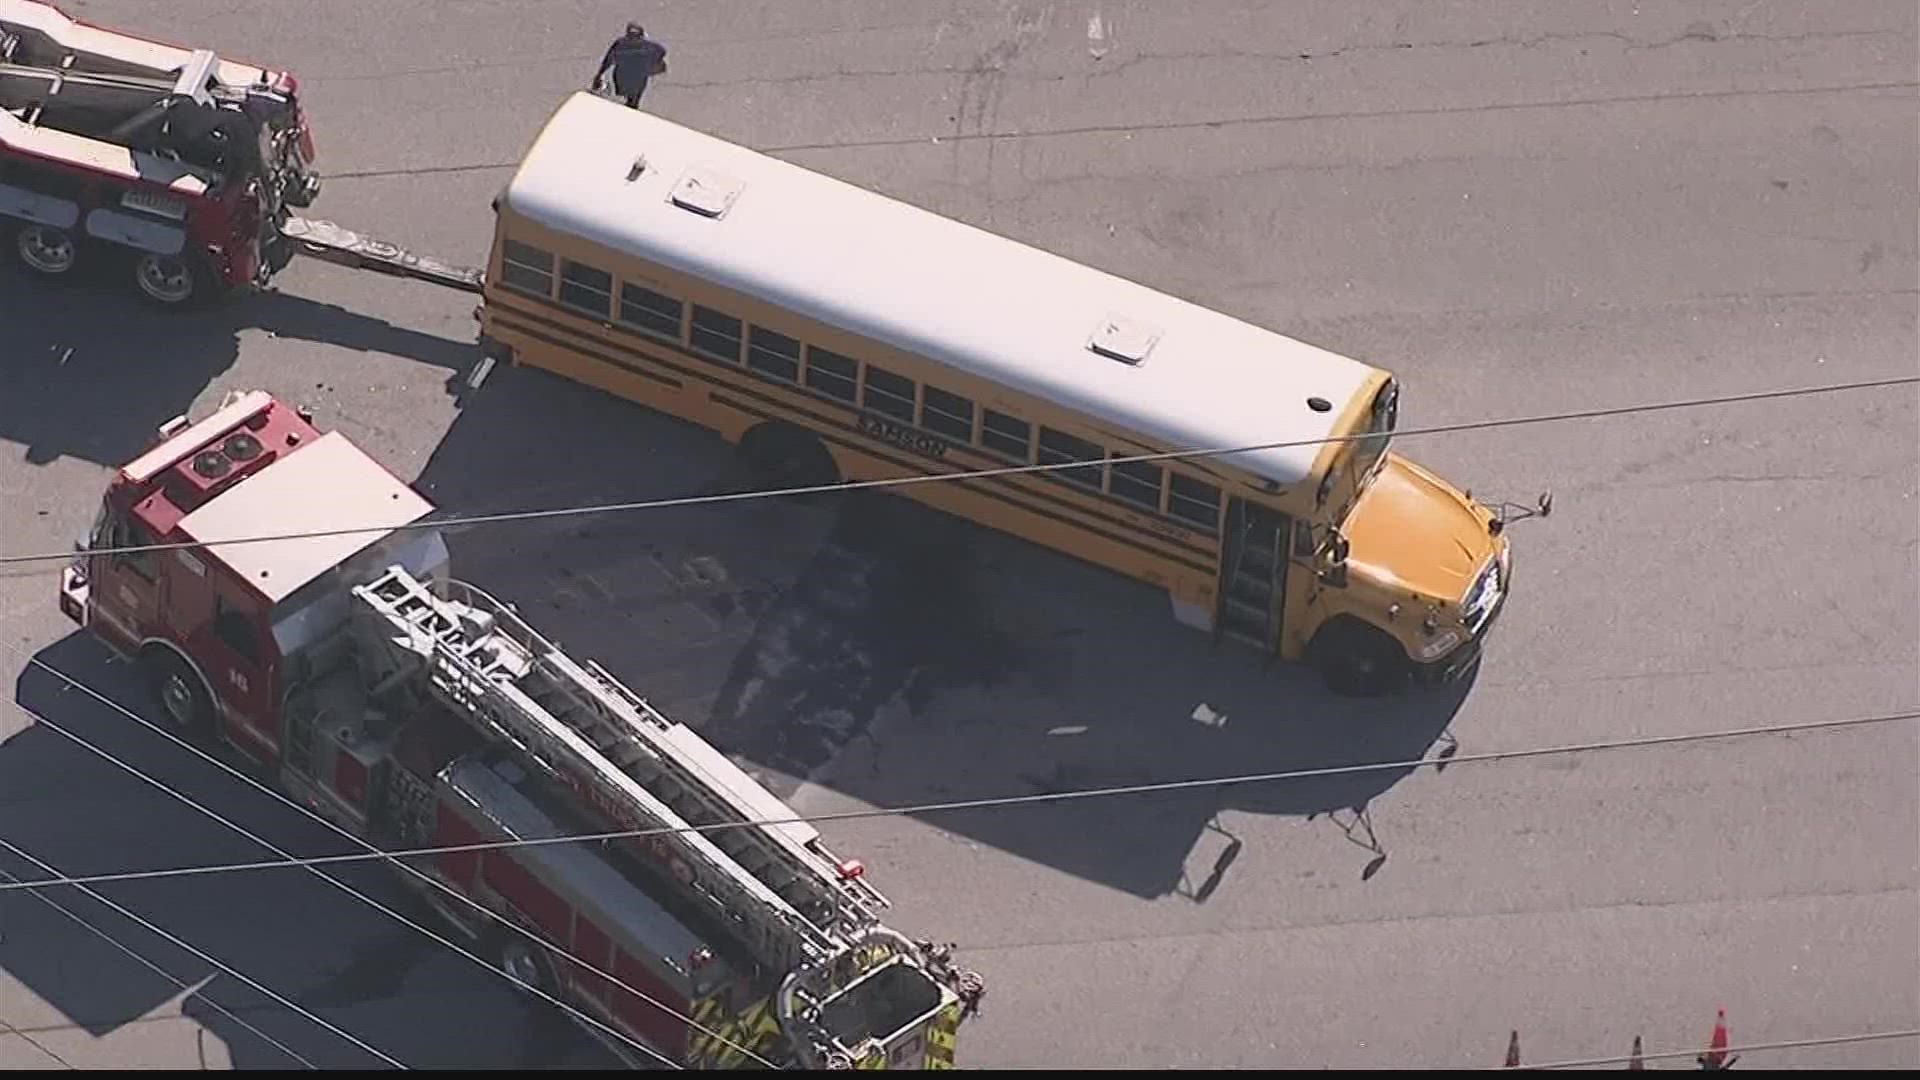 None of the K-2nd grade students were hurt on the bus, including their driver, according to DeKalb Police.